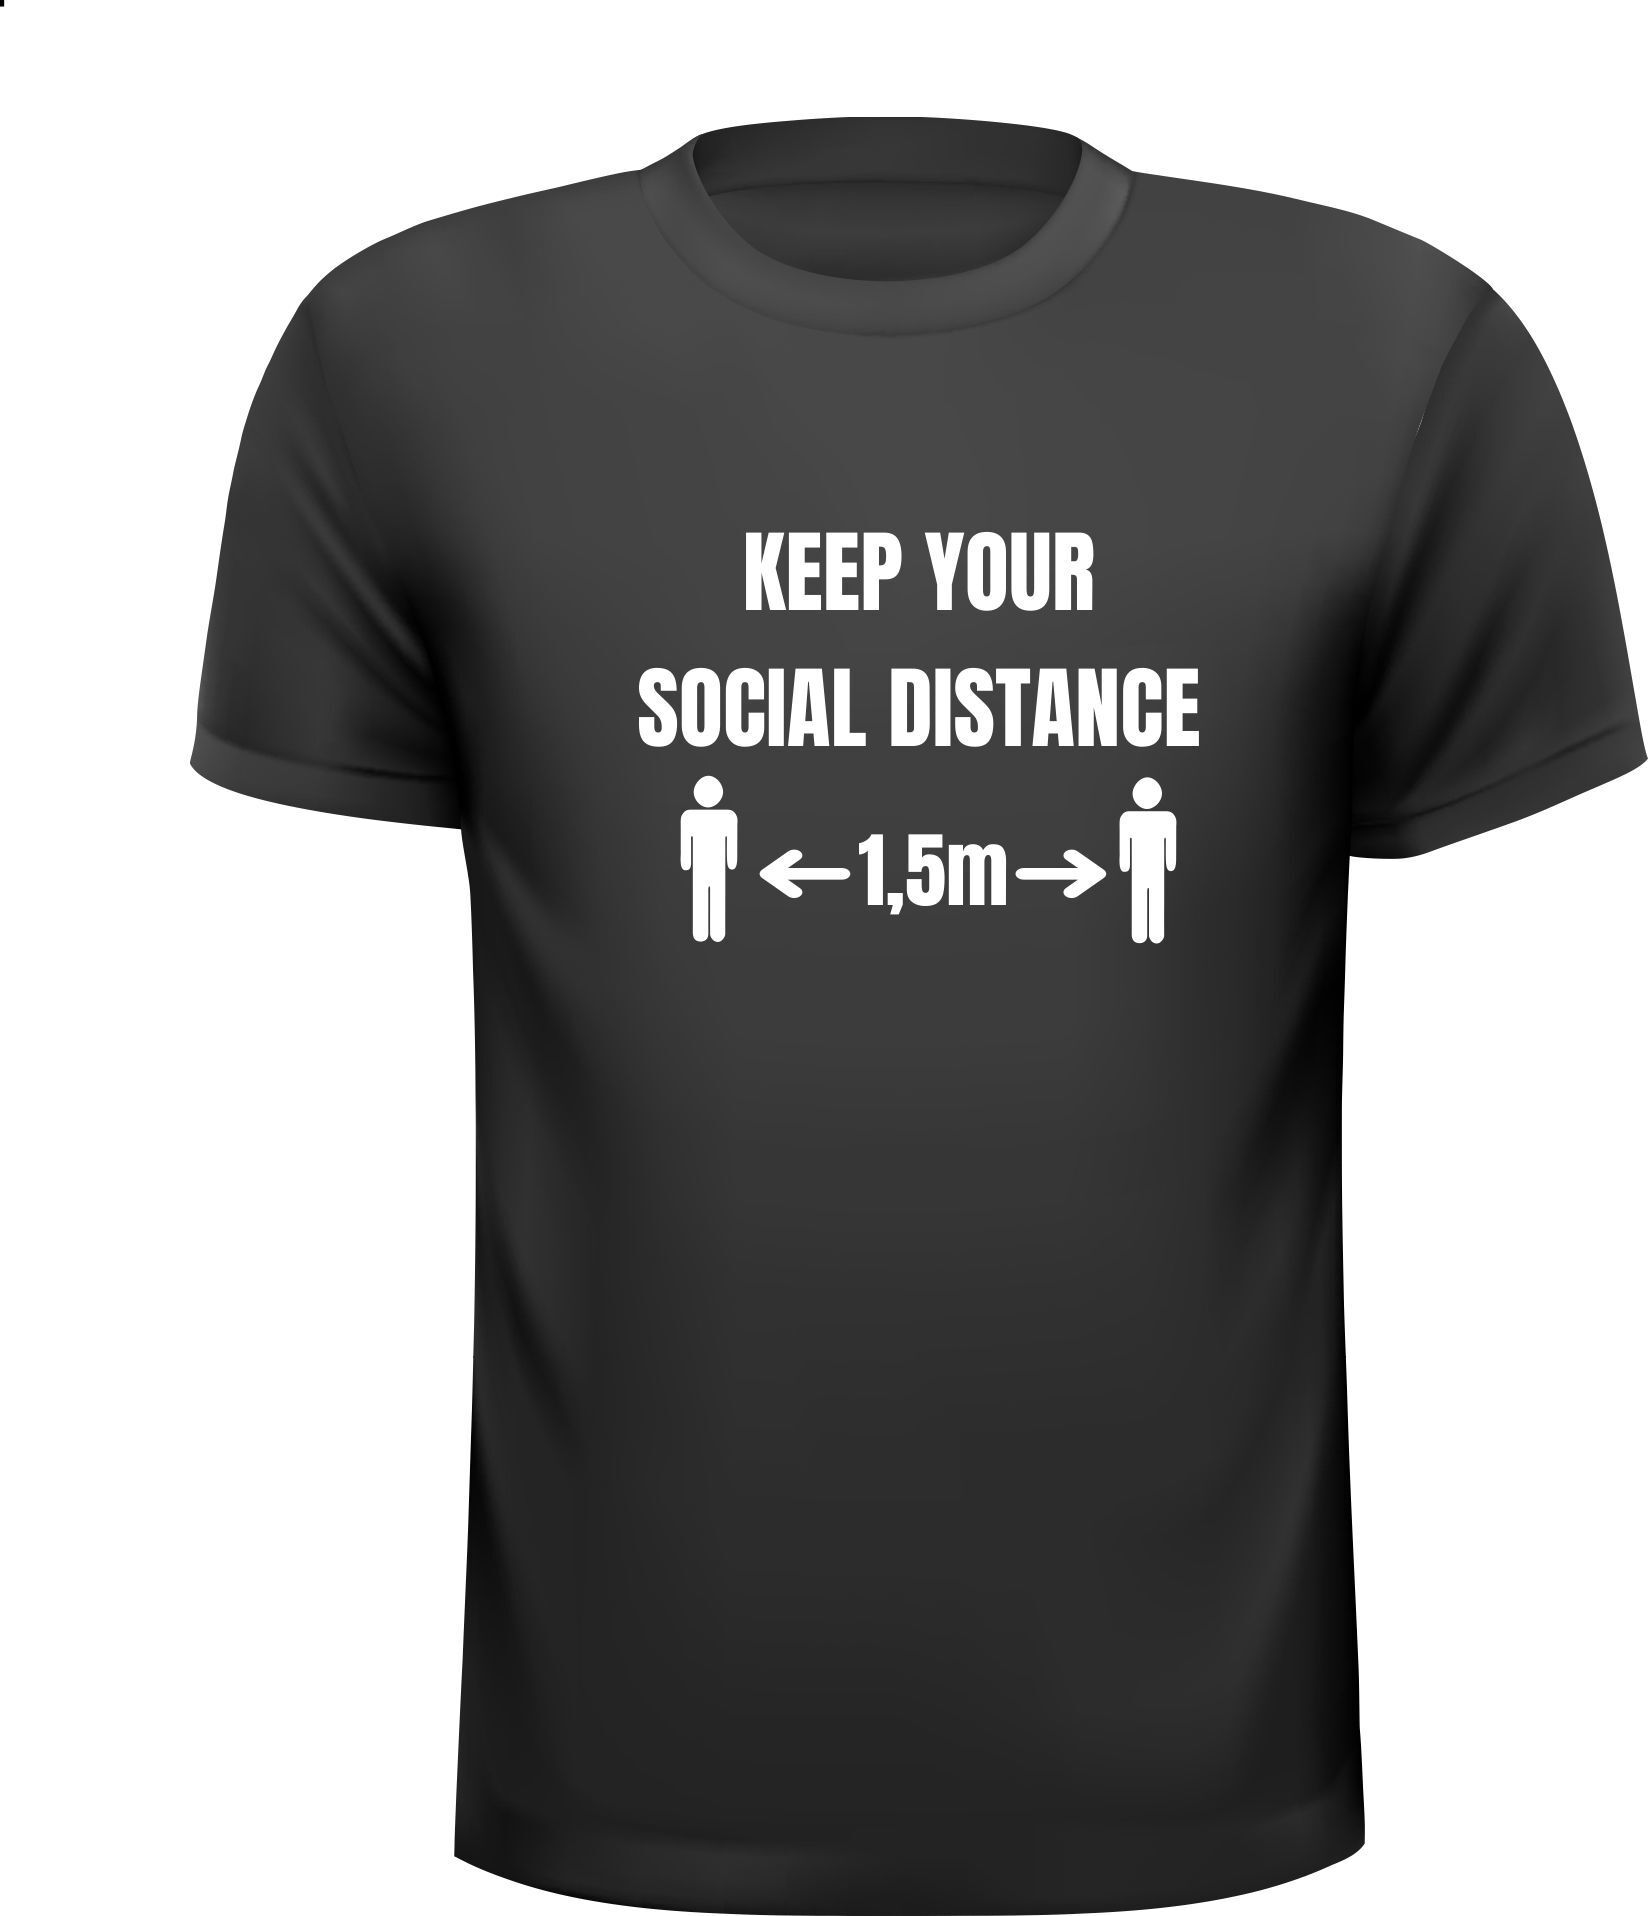 Keep your social distance hou afstand 1,5 meter